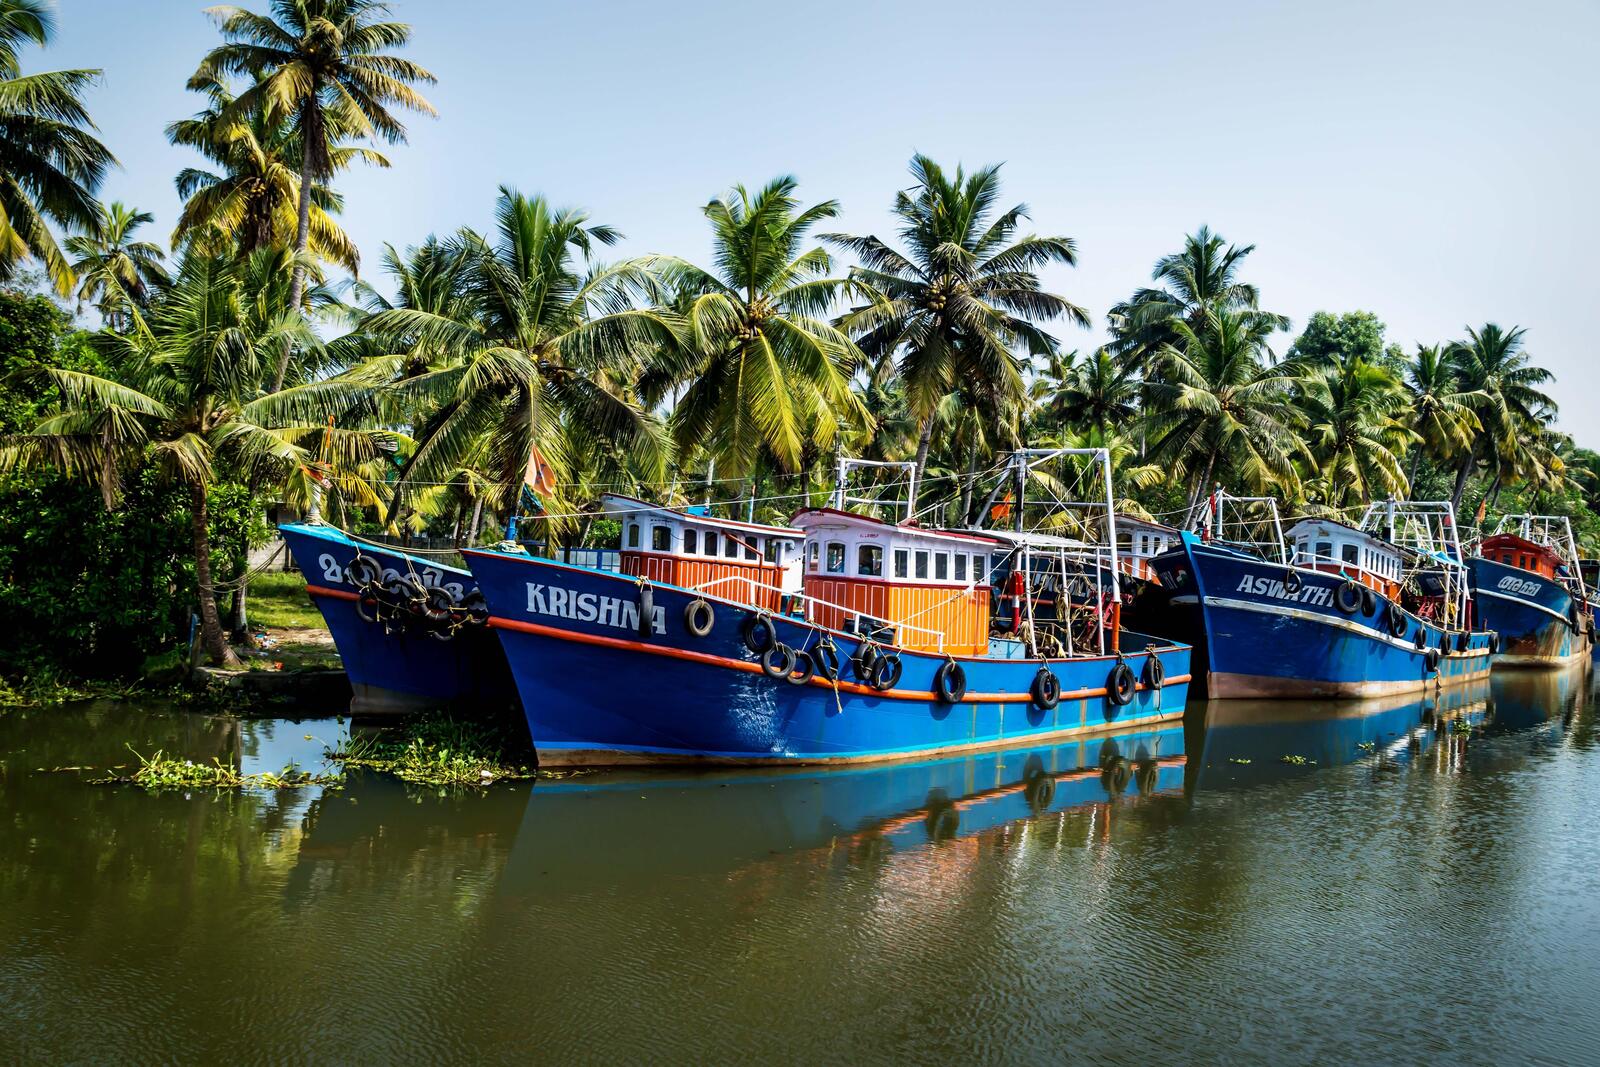 Several fishing boats float in a canal-like space with palm trees in the background